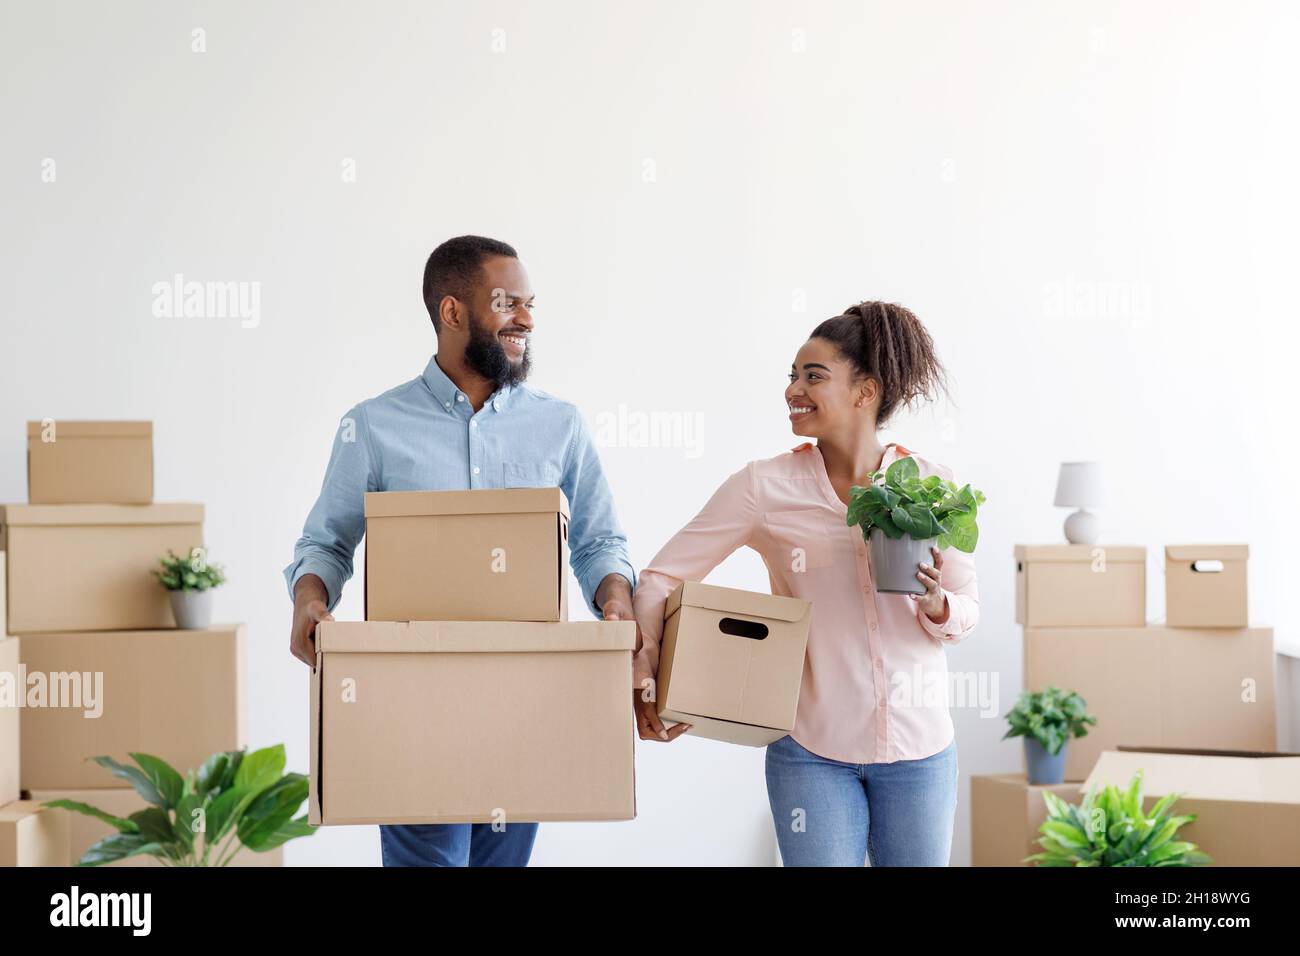 Happy young black man and woman carry cardboard boxes with things in room interior Stock Photo